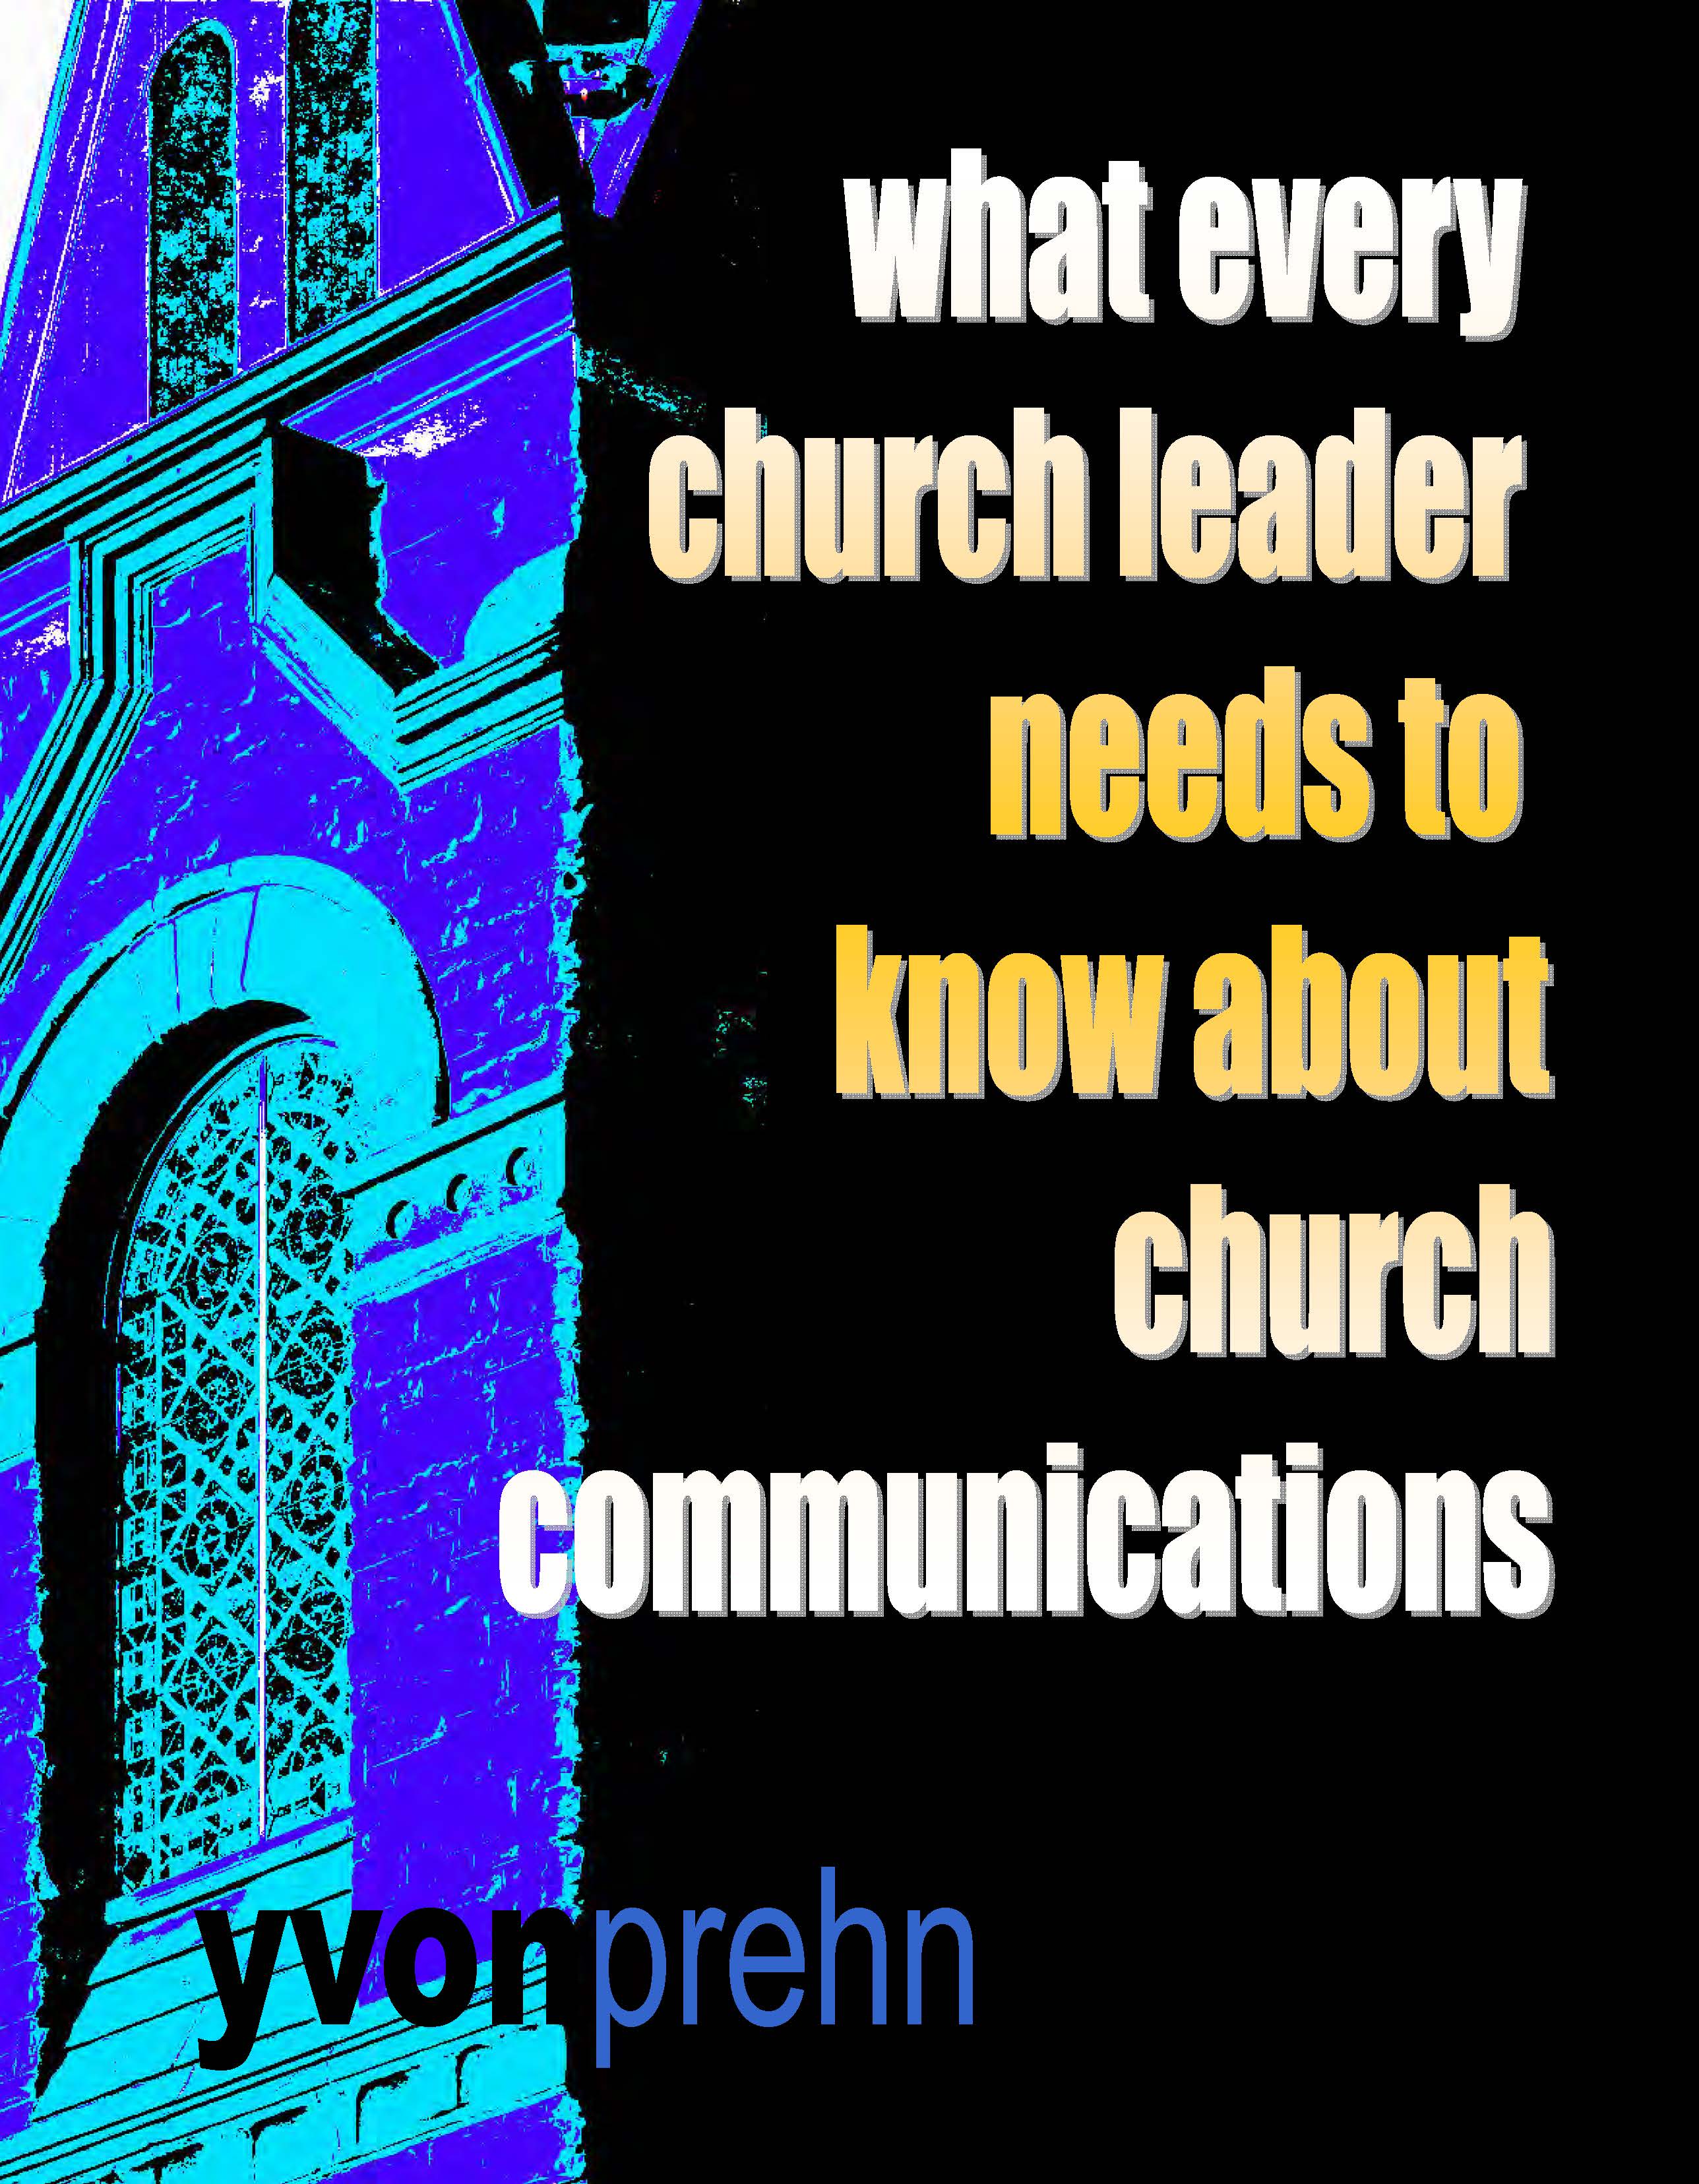 About Church